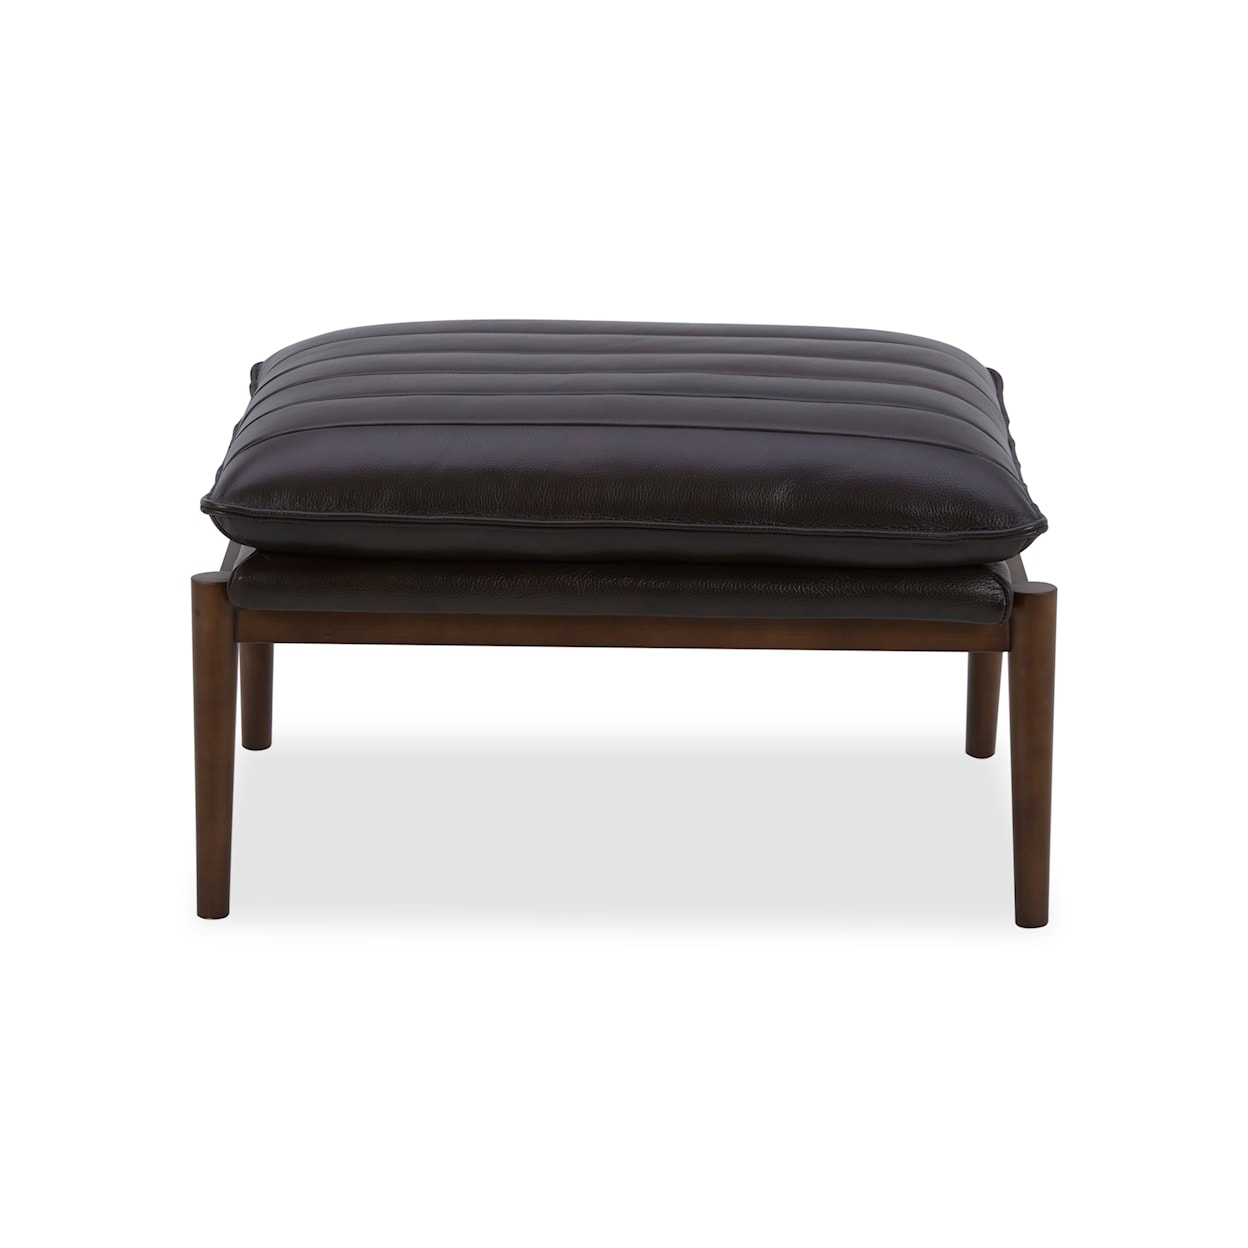 Warehouse M ETHAN Brown Accent Leather Ottoman